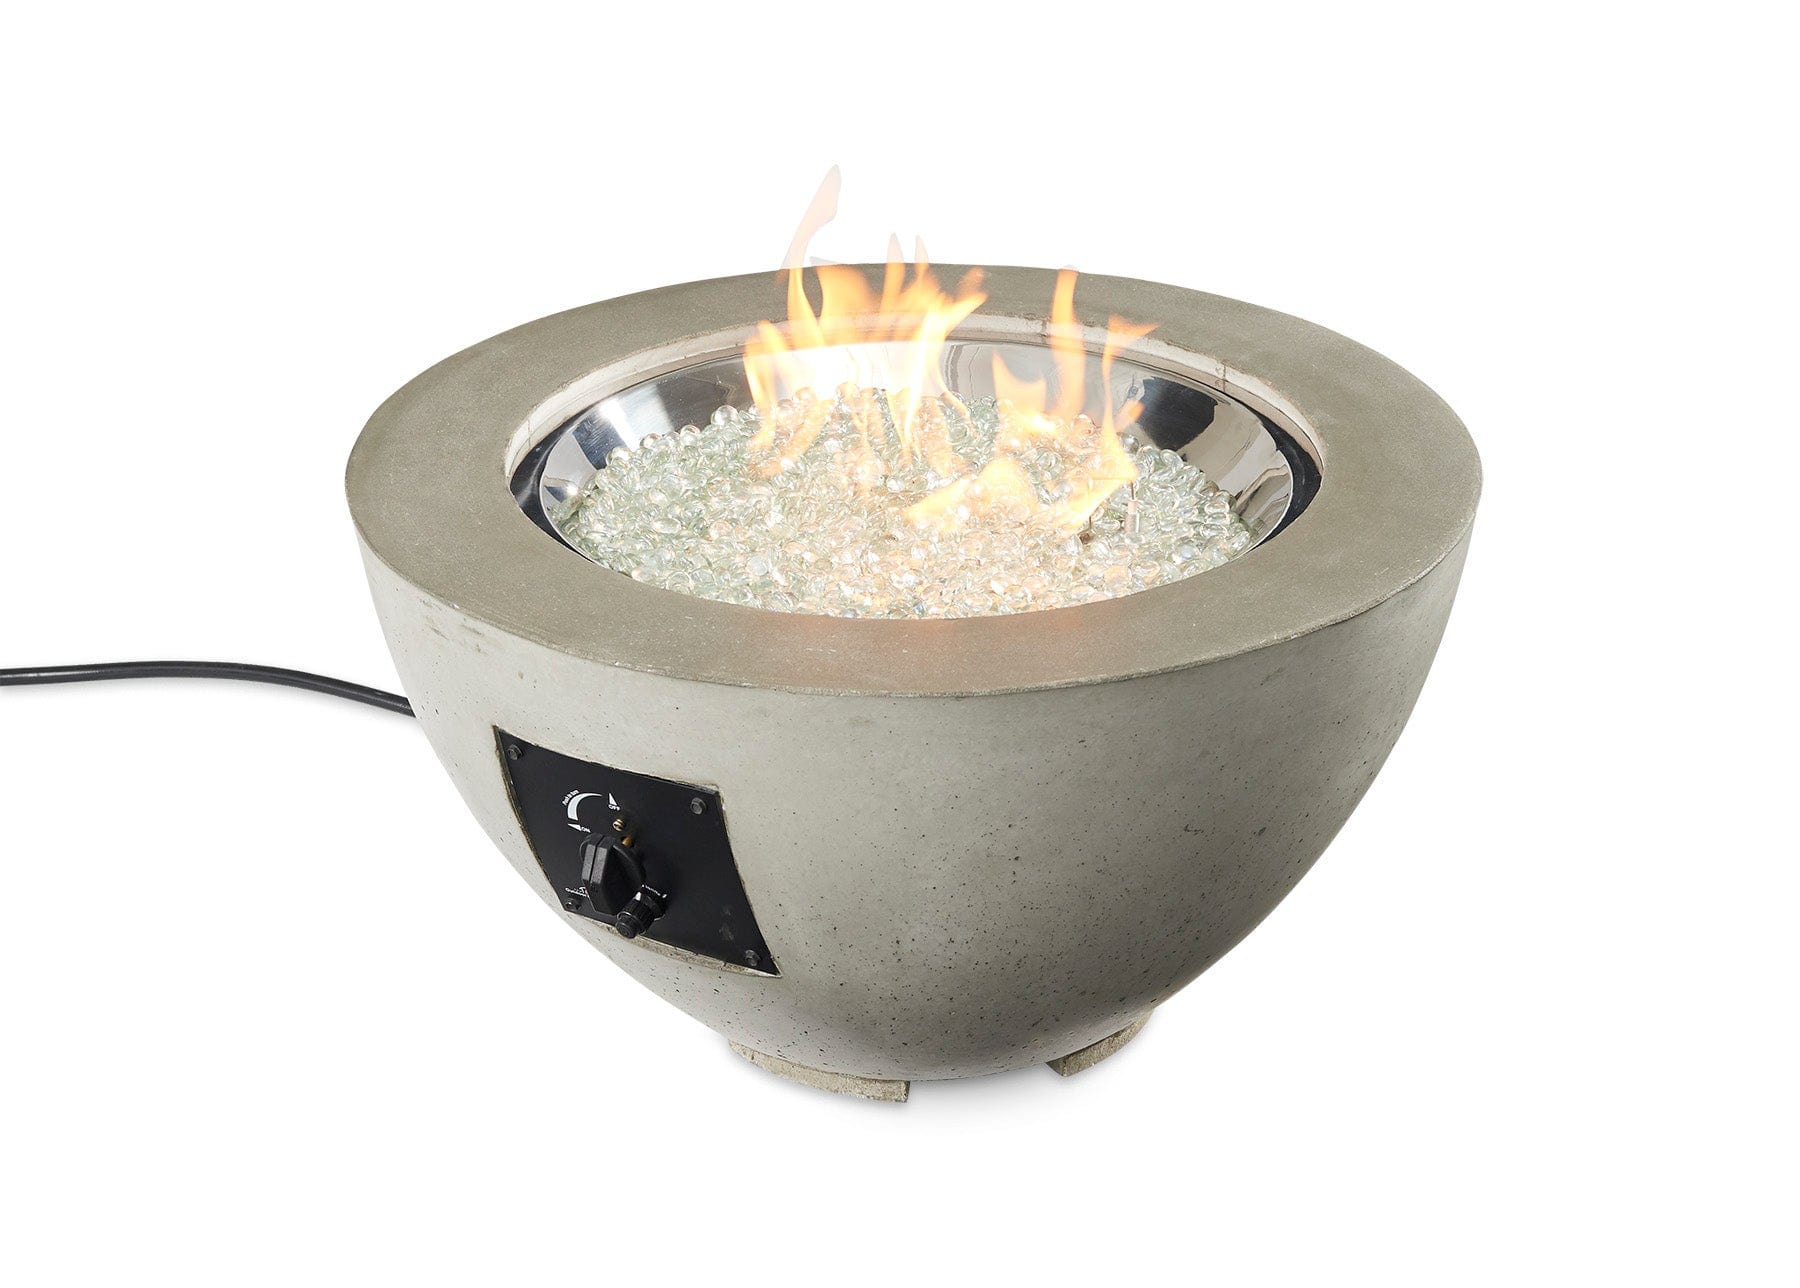 https://cdn.shopify.com/s/files/1/0223/8188/7560/products/the-outdoor-great-room-fire-features-the-outdoor-greatroom-cove-29-round-gas-fire-pit-bowl-cv-20-36875915919601_2000x.jpg?v=1646971990